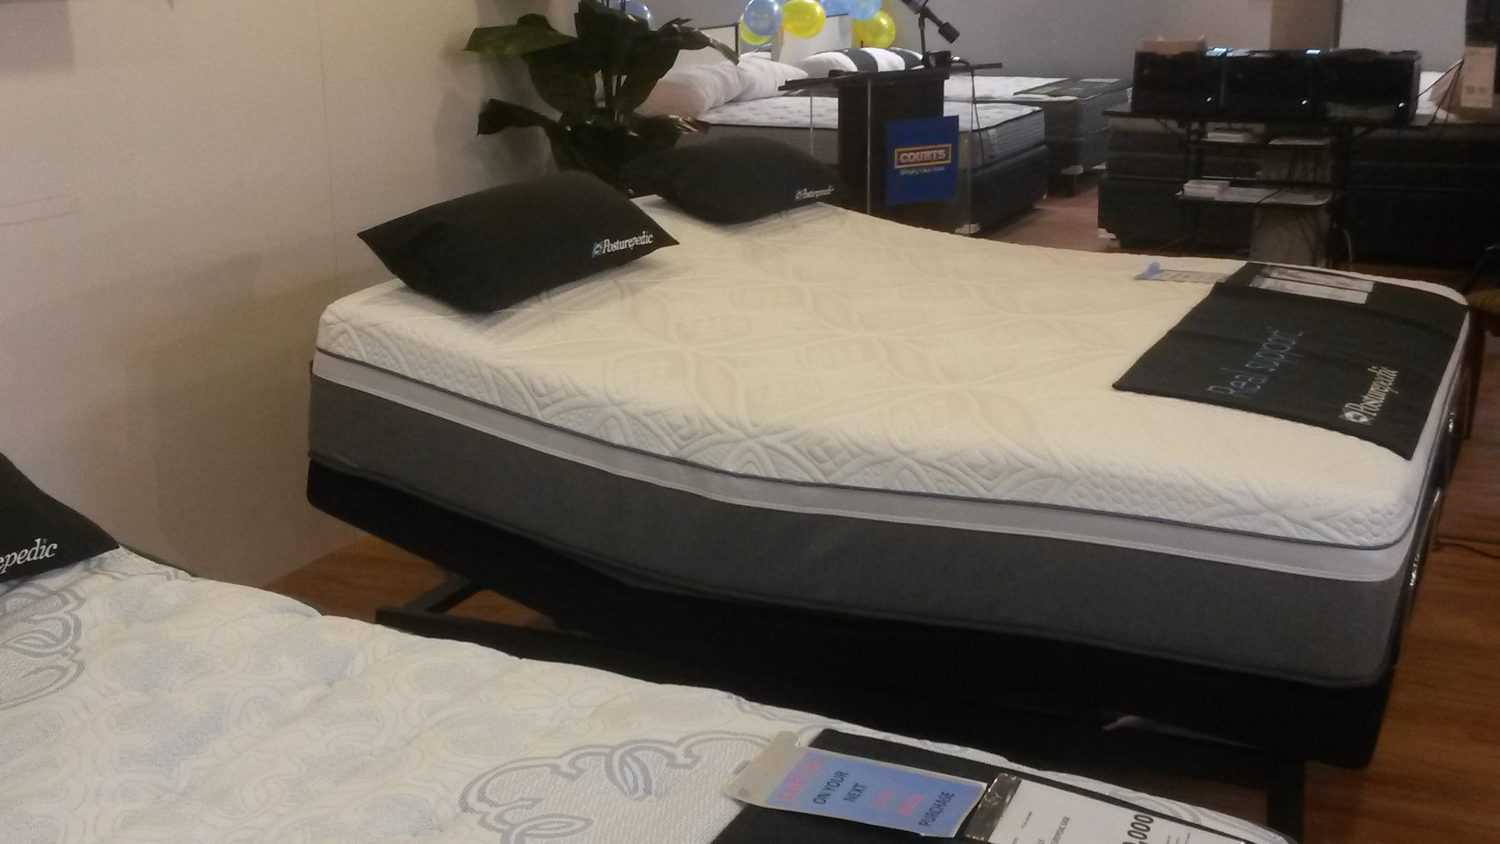 The Motion Custom adjustable bed at the Courts Sleep Centre
